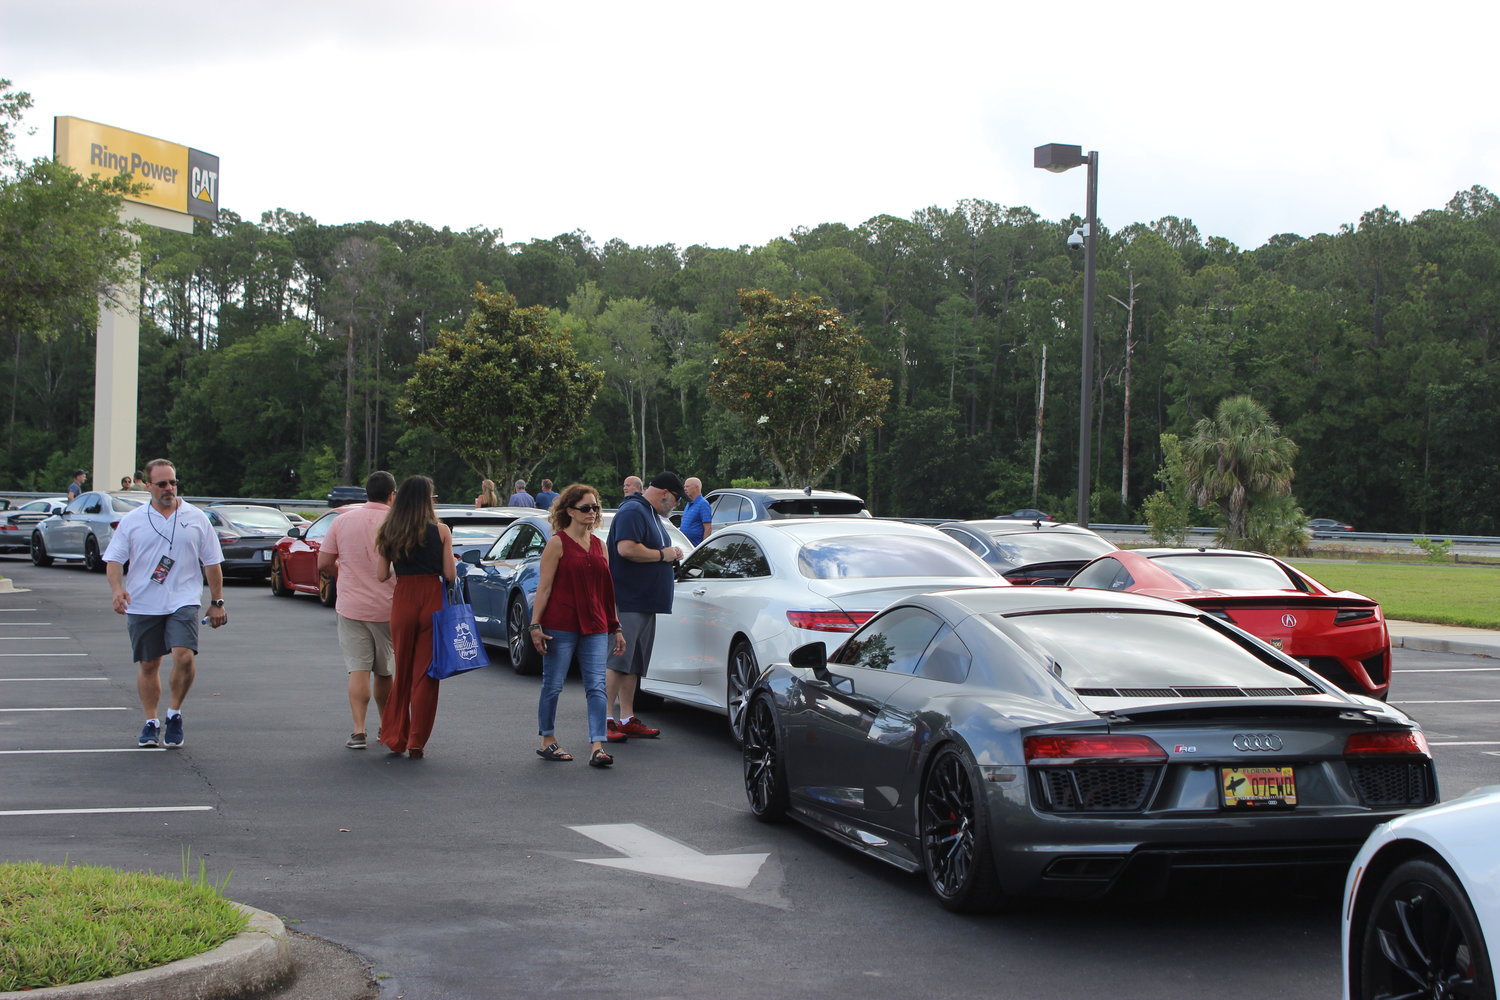 Attendees mingle and admire the luxury vehicles lined up to participate in the 45-mile-long charity drive.